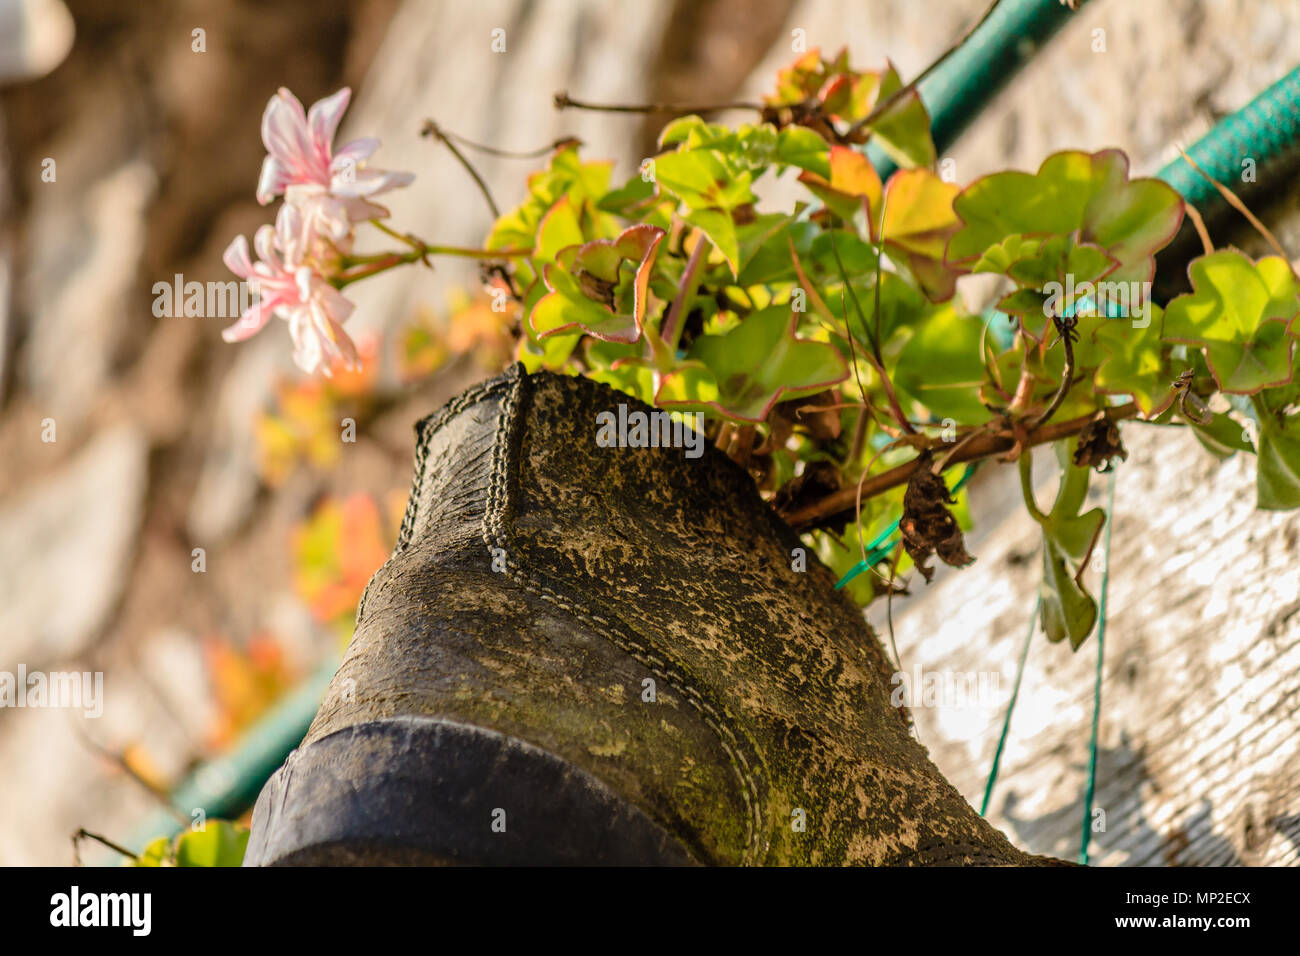 Flowers growing in an old shoe which is being used as a plant pot. Teignmouth, Devon. Feb 2018. Stock Photo